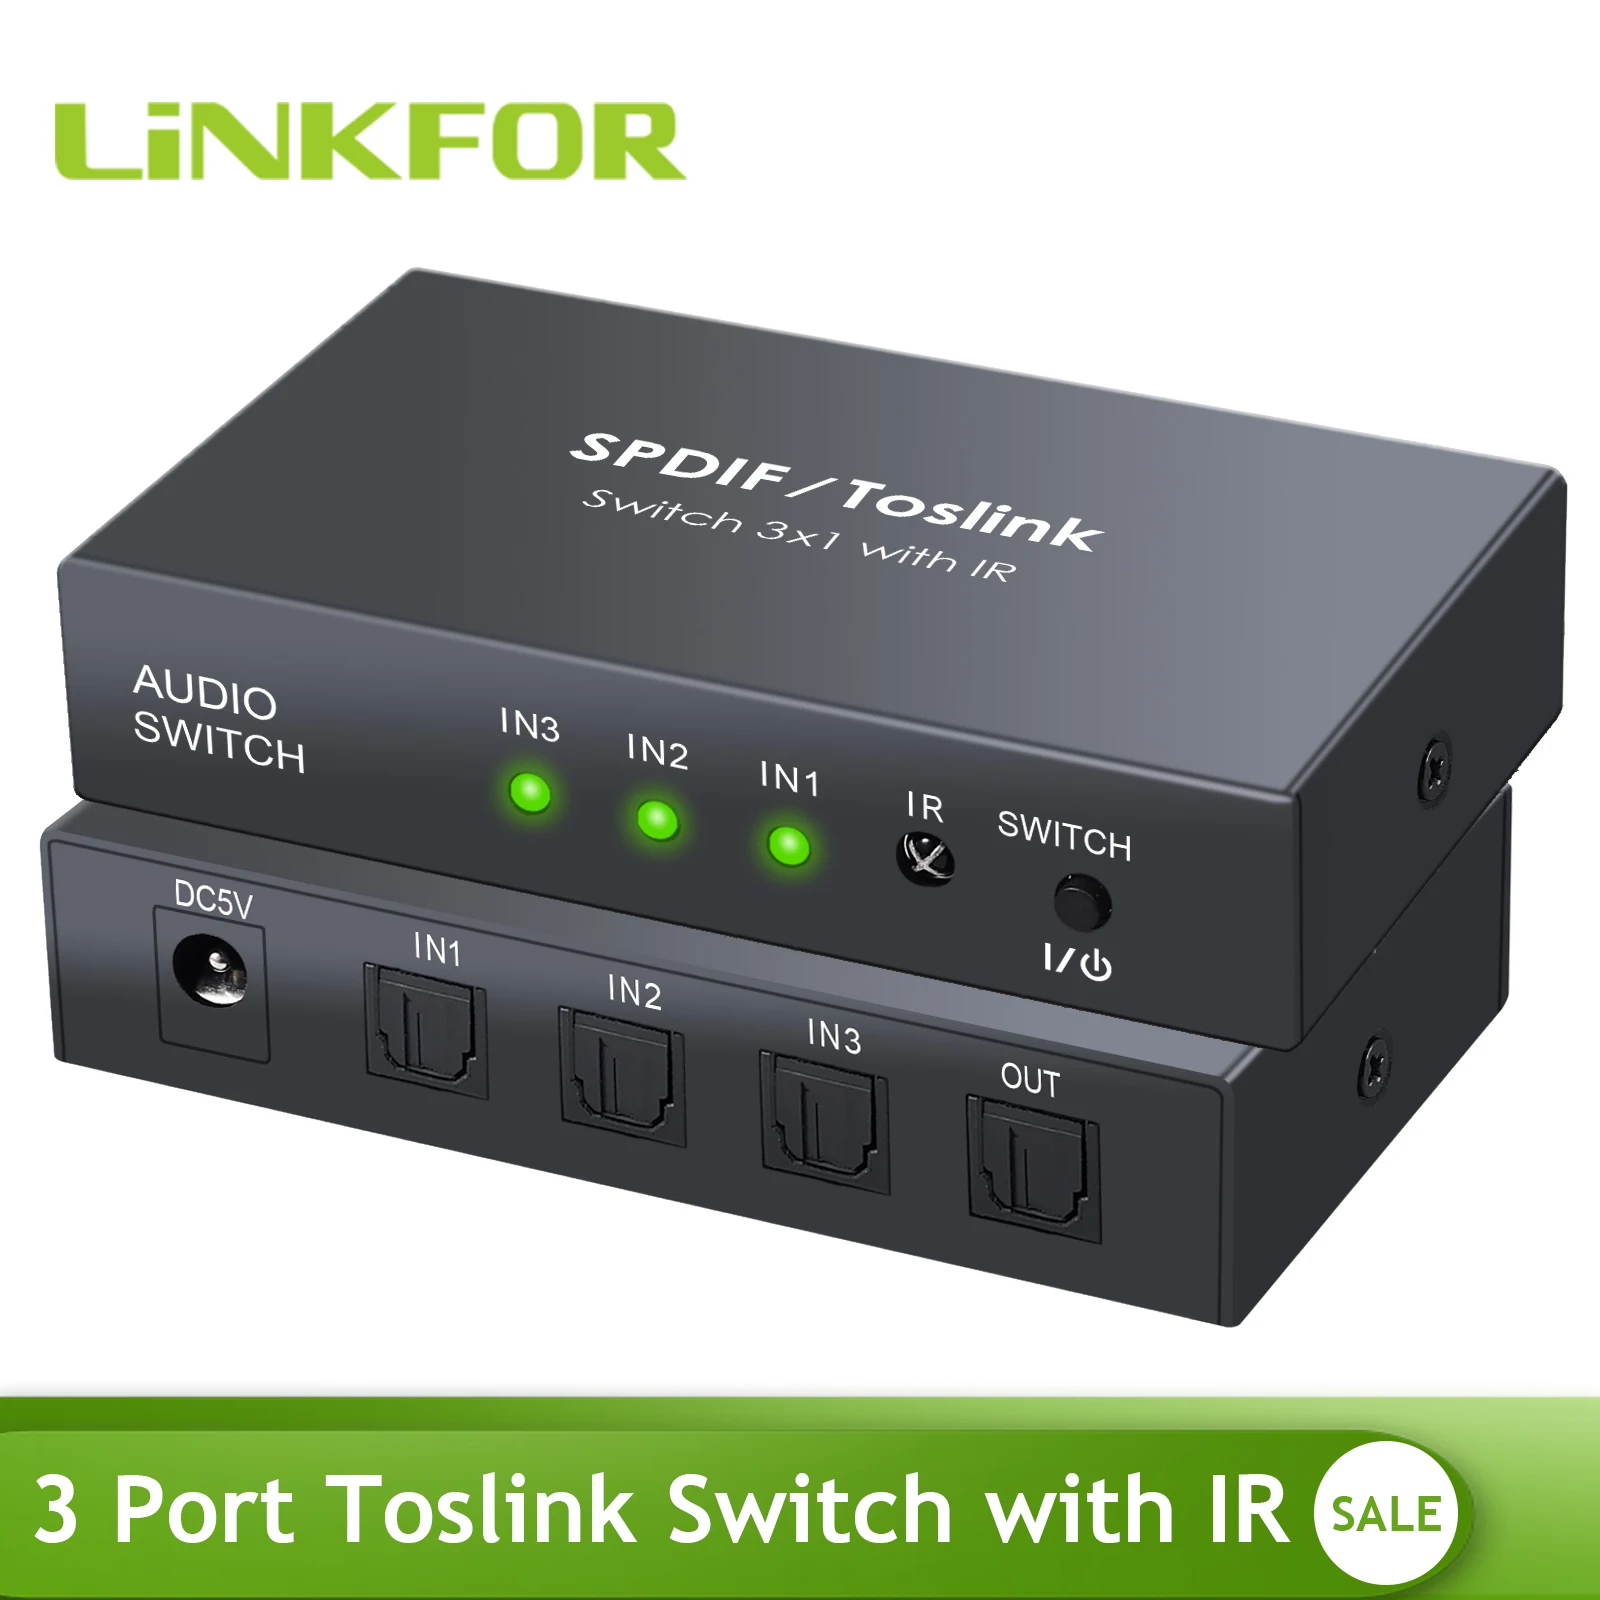 LiNKFOR Digital Toslink Optical 3x1 Switch with 3ft Optical Cable and IR  Remote Control Aluminum Alloy Digital Audio SPDIF Toslink Optical Fiber